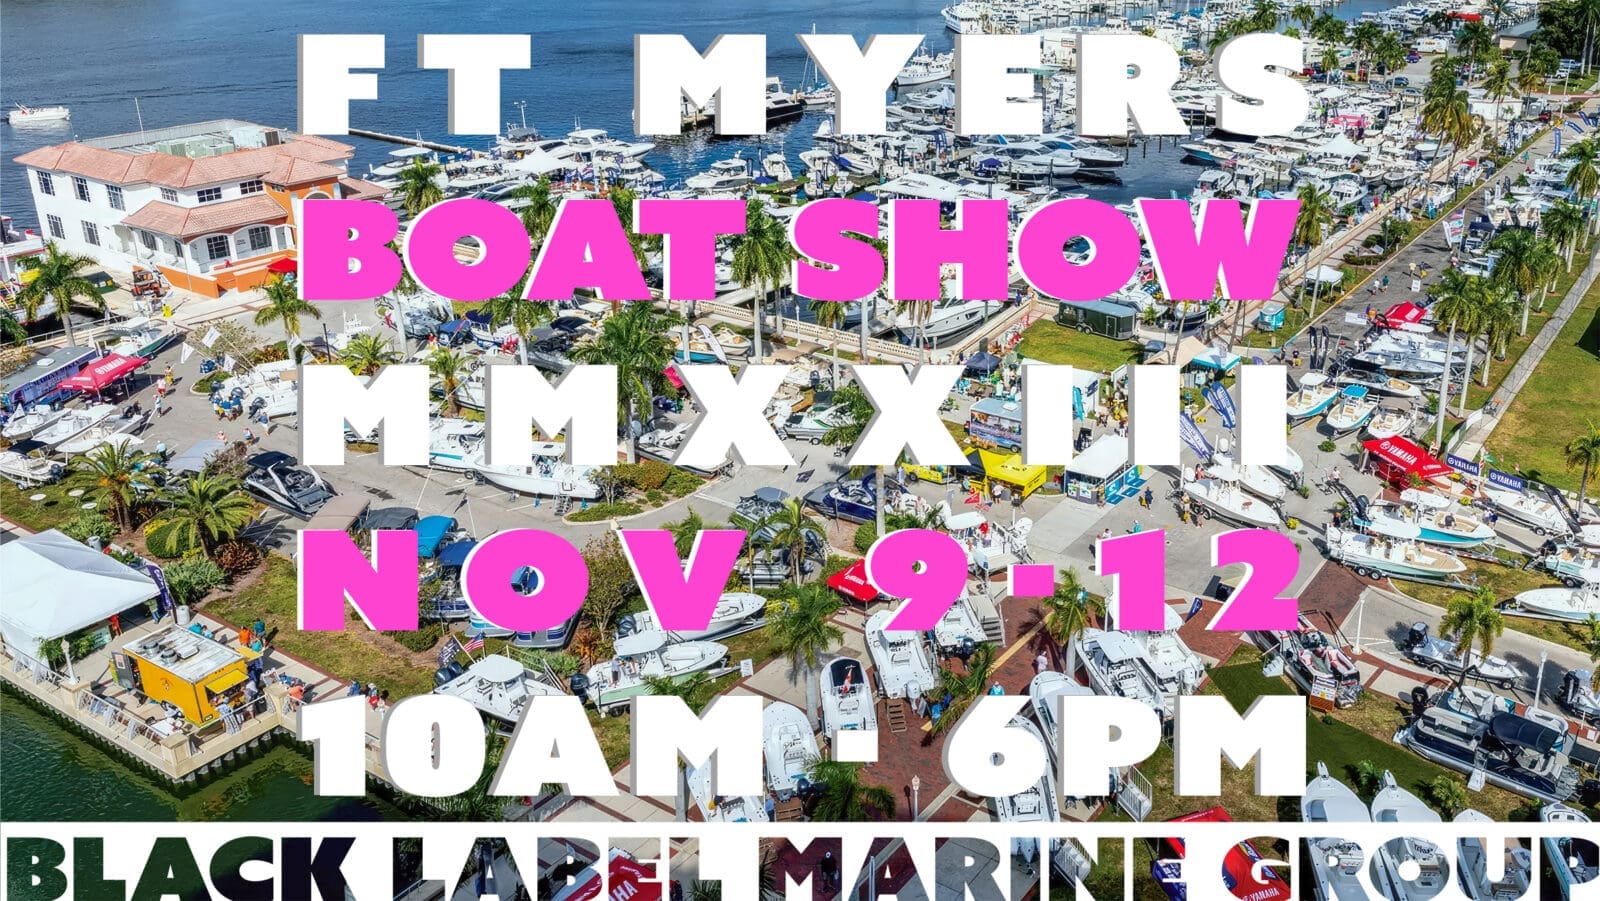 ft myers boat show banner ver 2.png